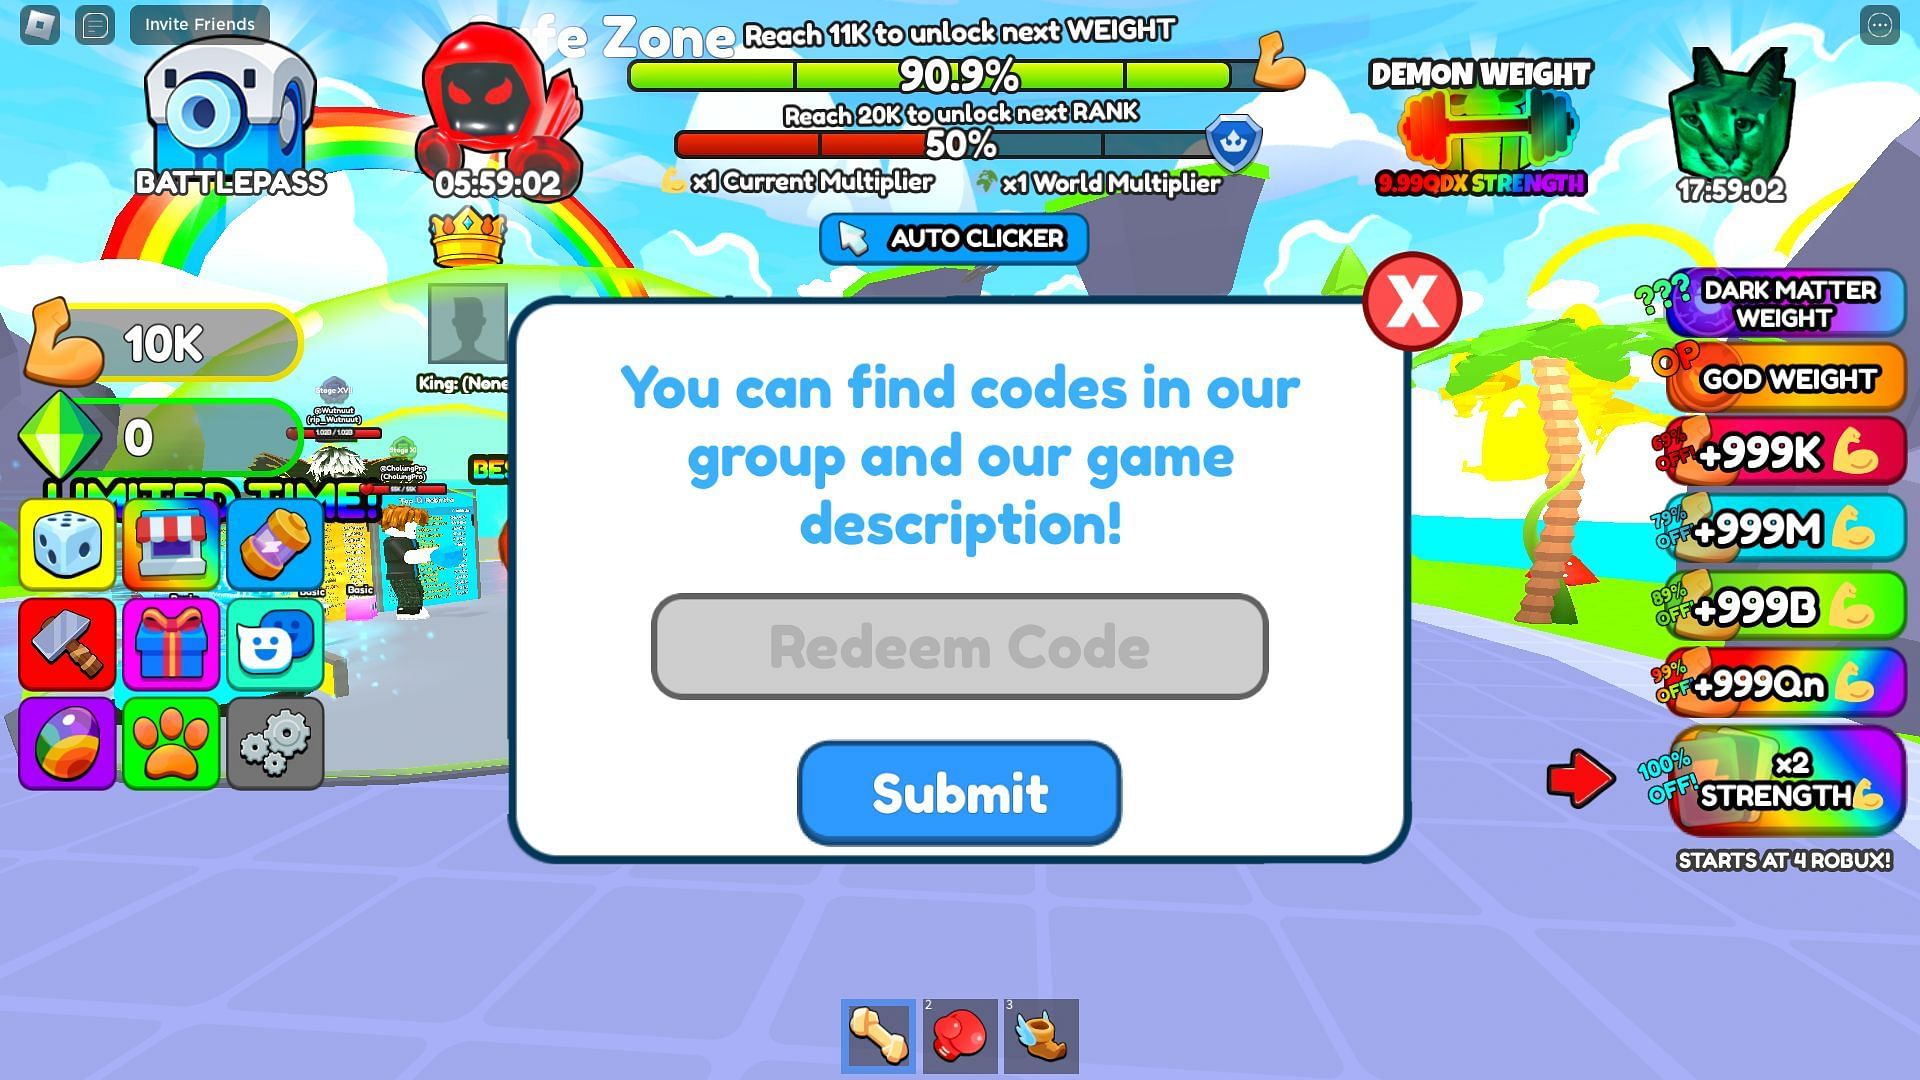 Active codes for Strongest Man Simulator (Image via Roblox)